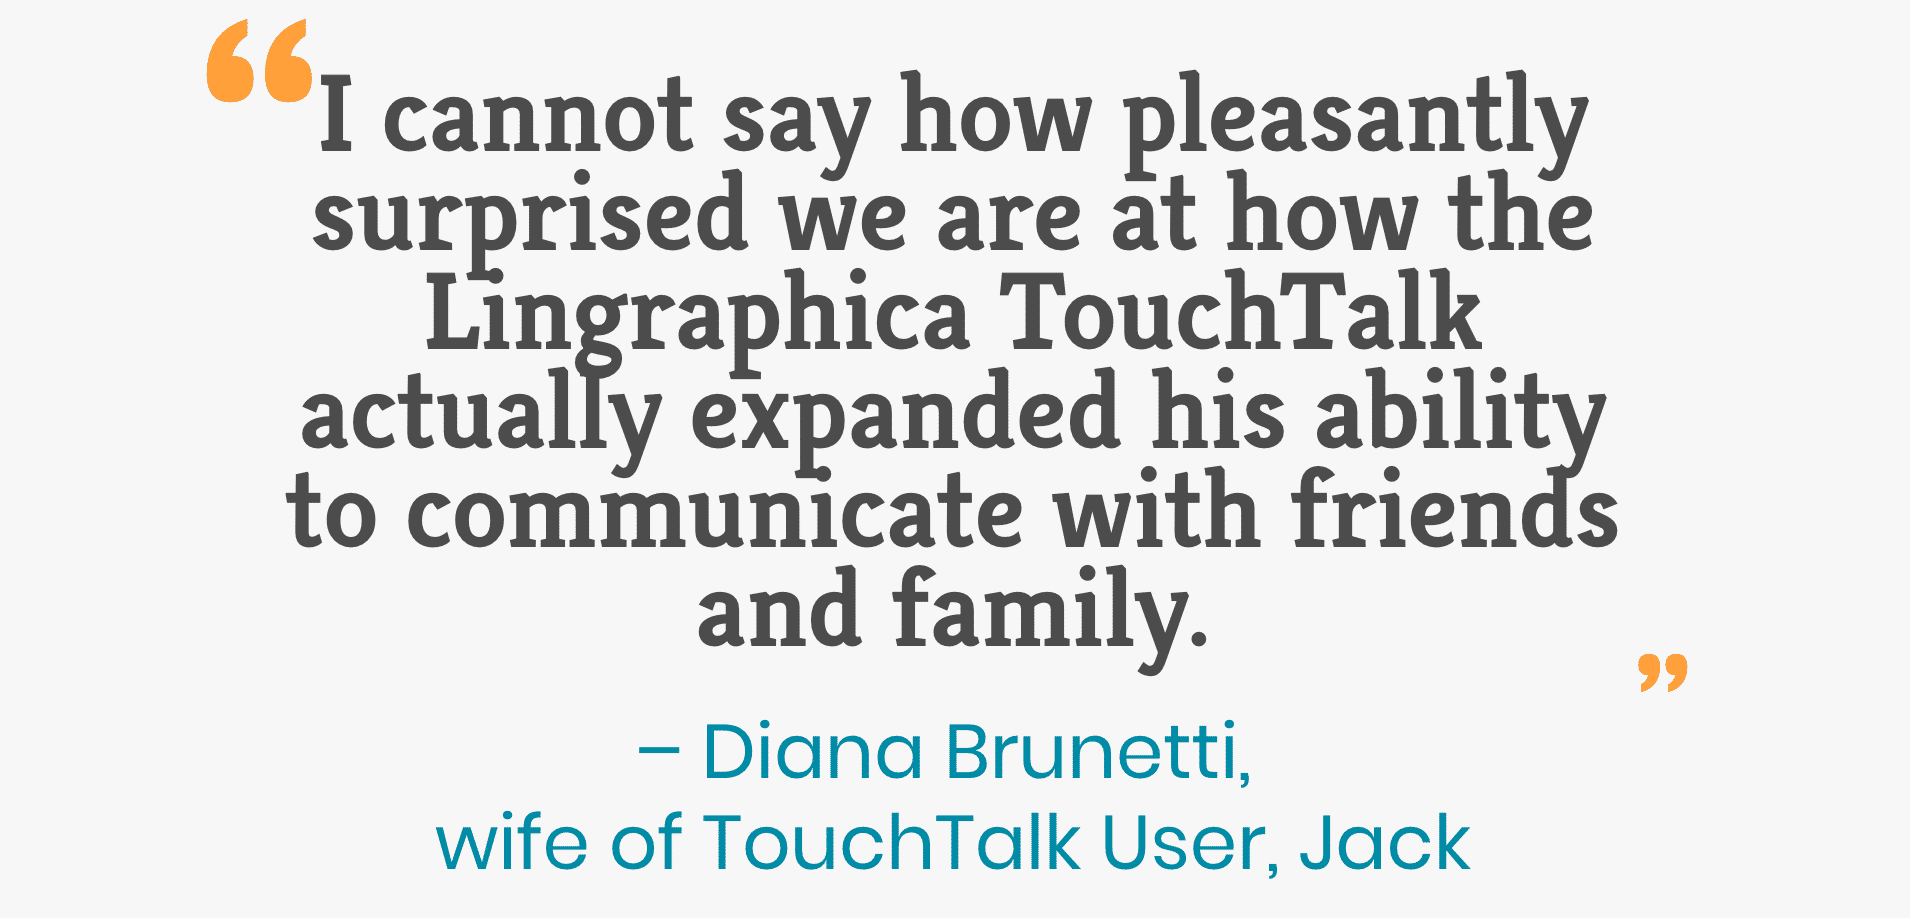 I cannot say how pleasantly surprised we are at how the Lingraphica TouchTalk actually expanded his ability to communicate with friends and family. – Diana Brunetti, wife of TouchTalk User, Jack